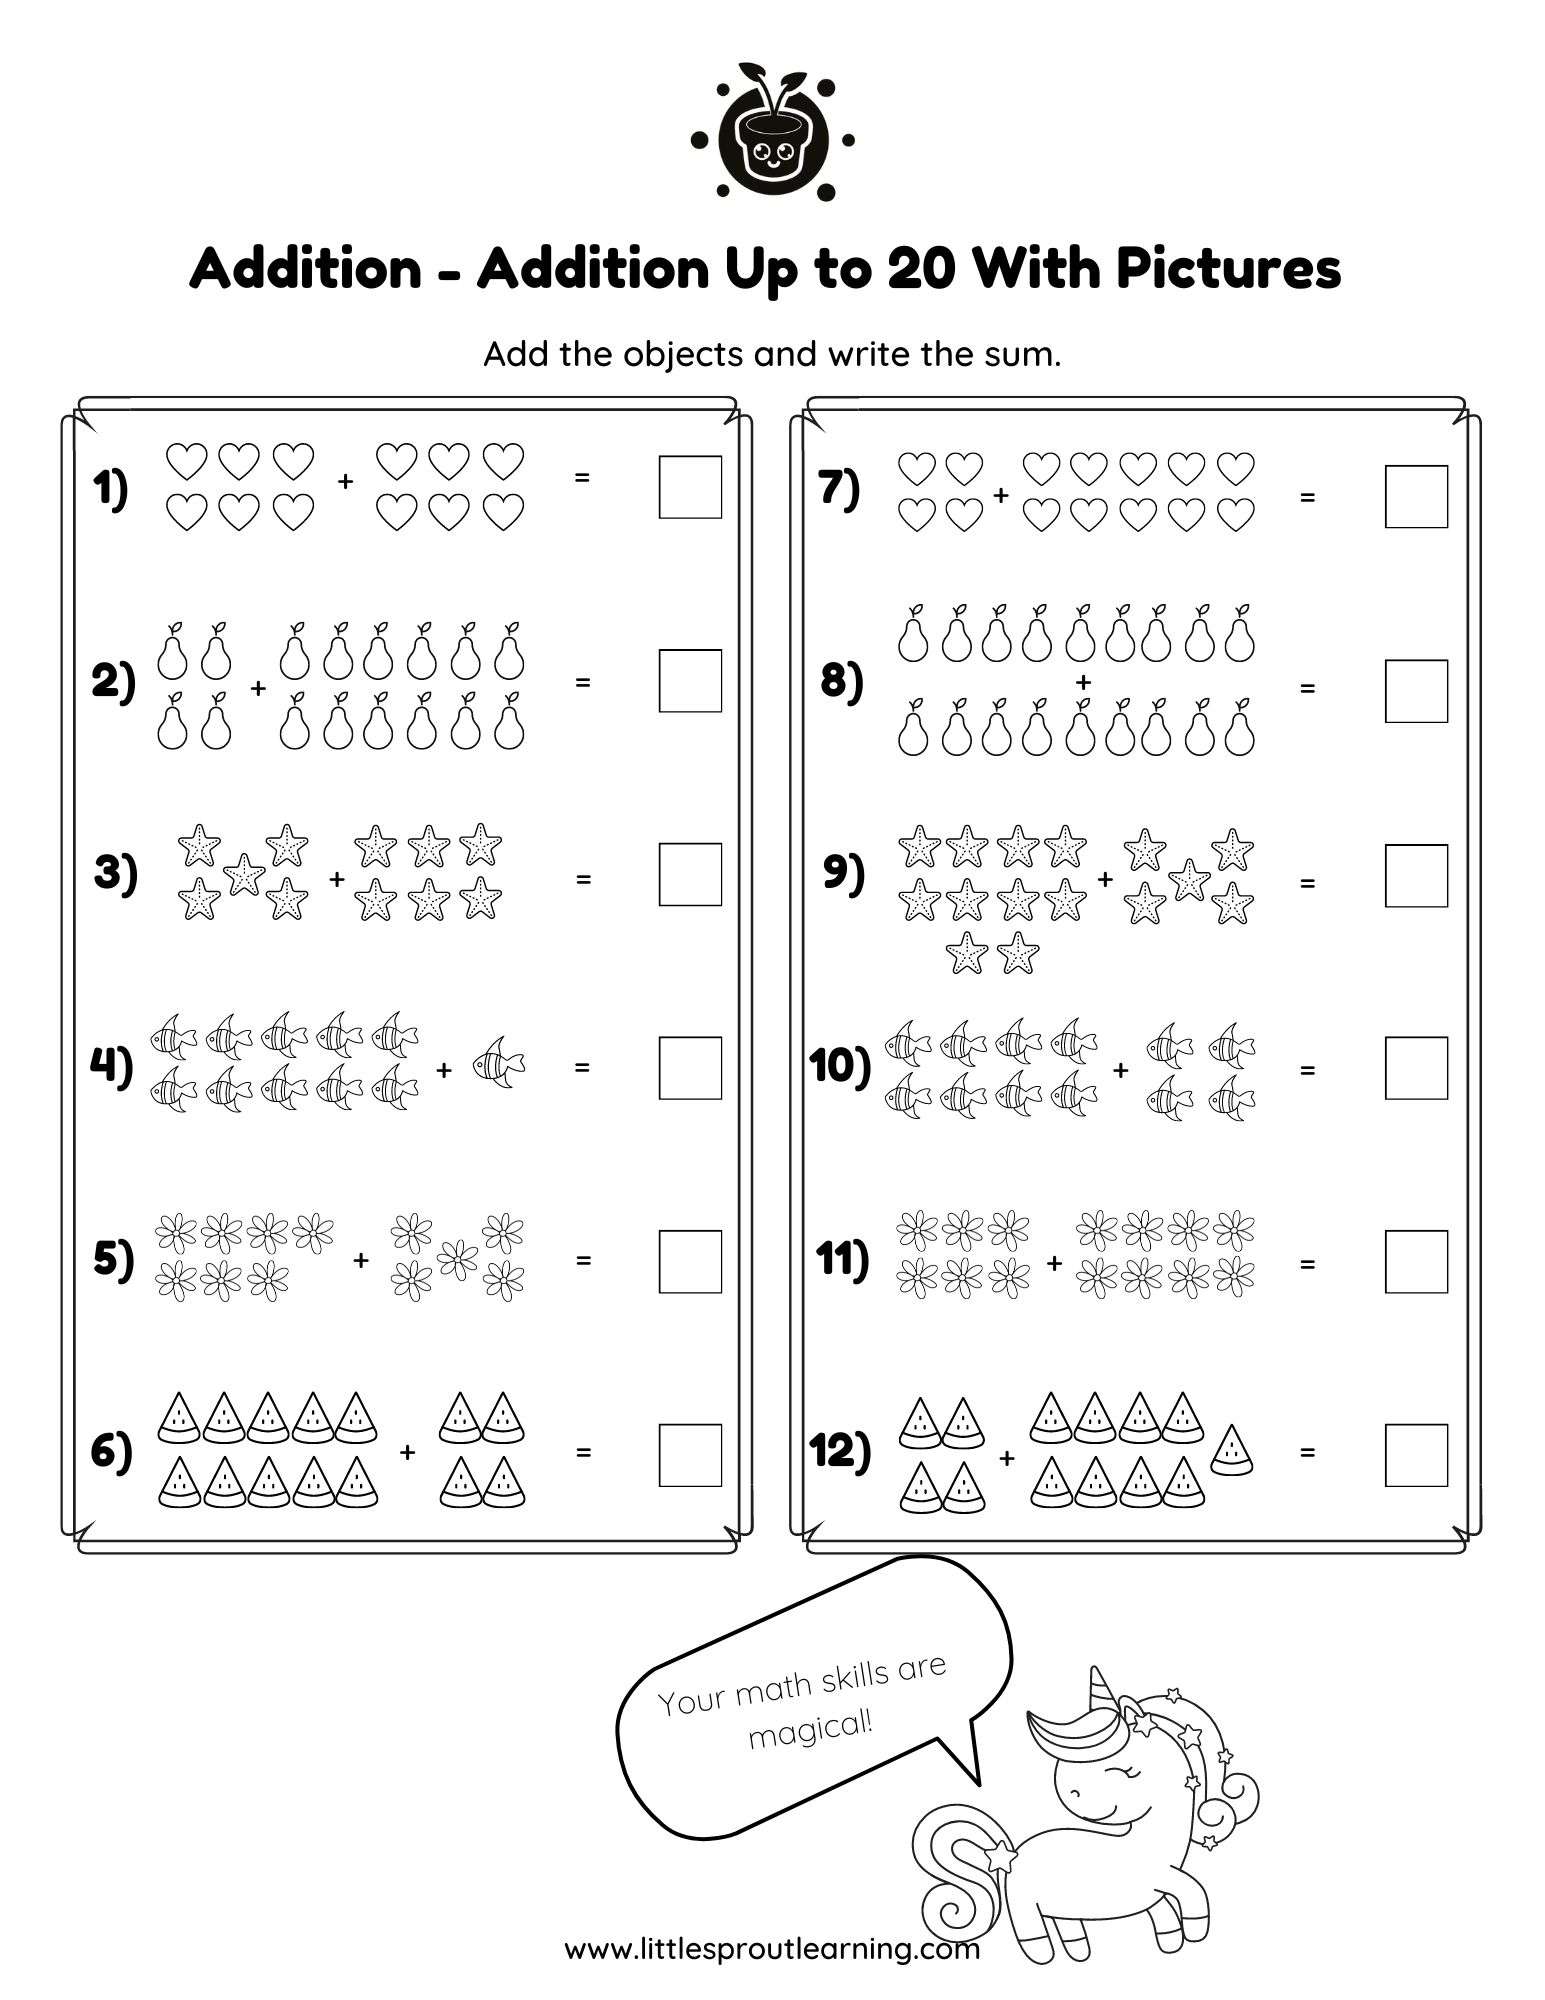 Addition Worksheet – Addition With Pictures Up to 20